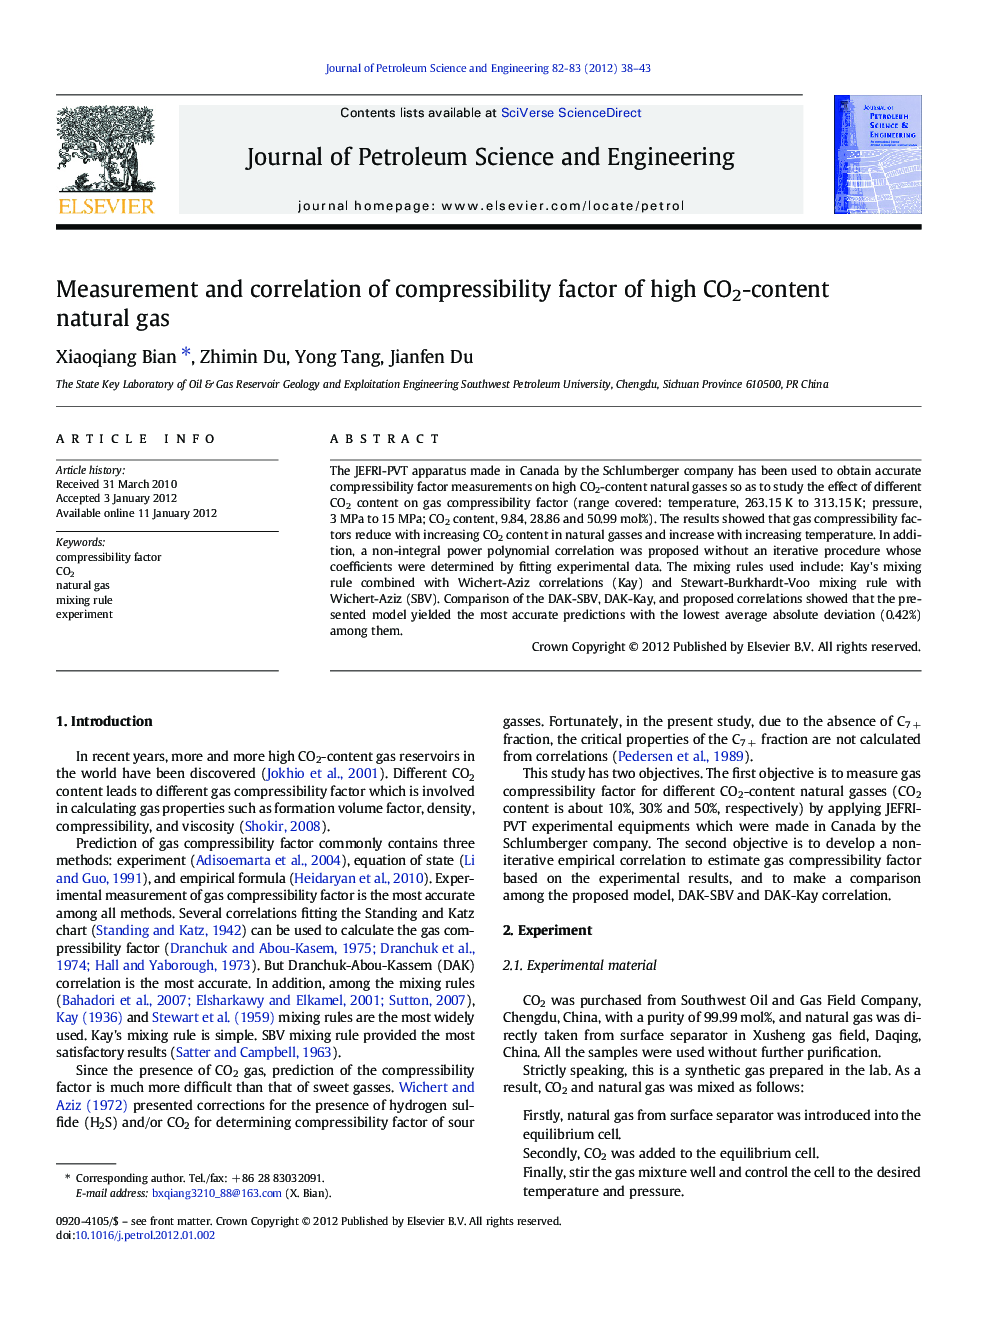 Measurement and correlation of compressibility factor of high CO2-content natural gas